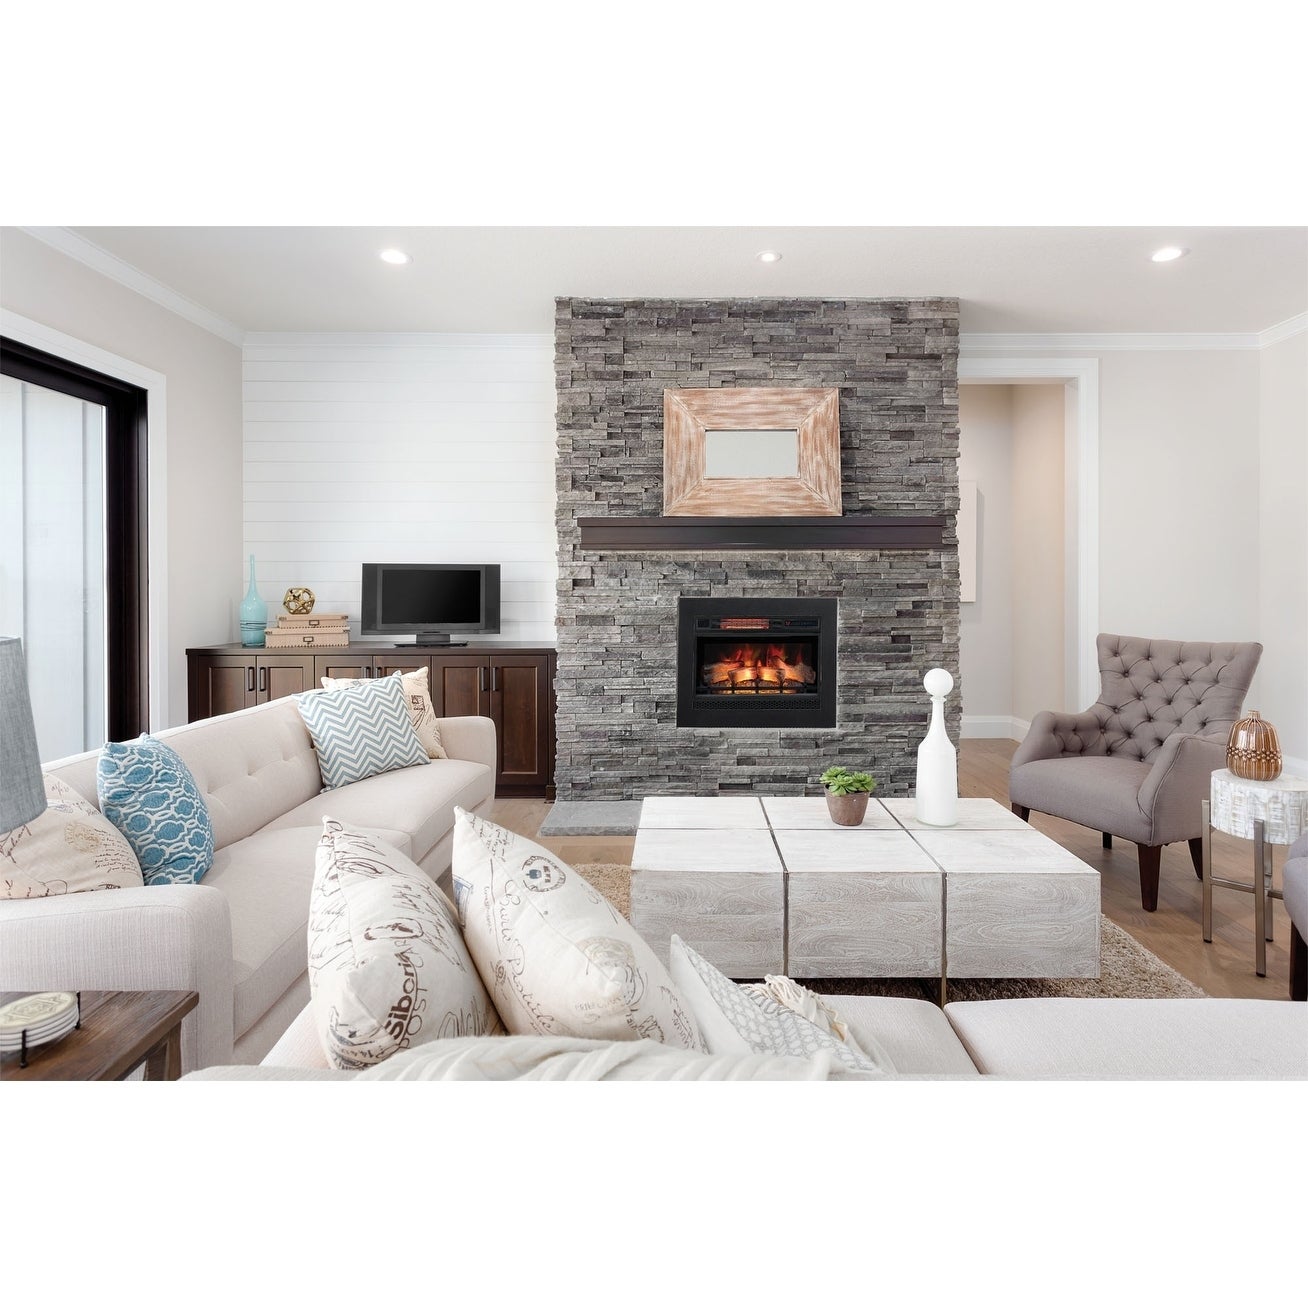 Fire and Ice Fireplace Beautiful Classicflame 26" 3d Infrared Quartz Electric Fireplace Insert